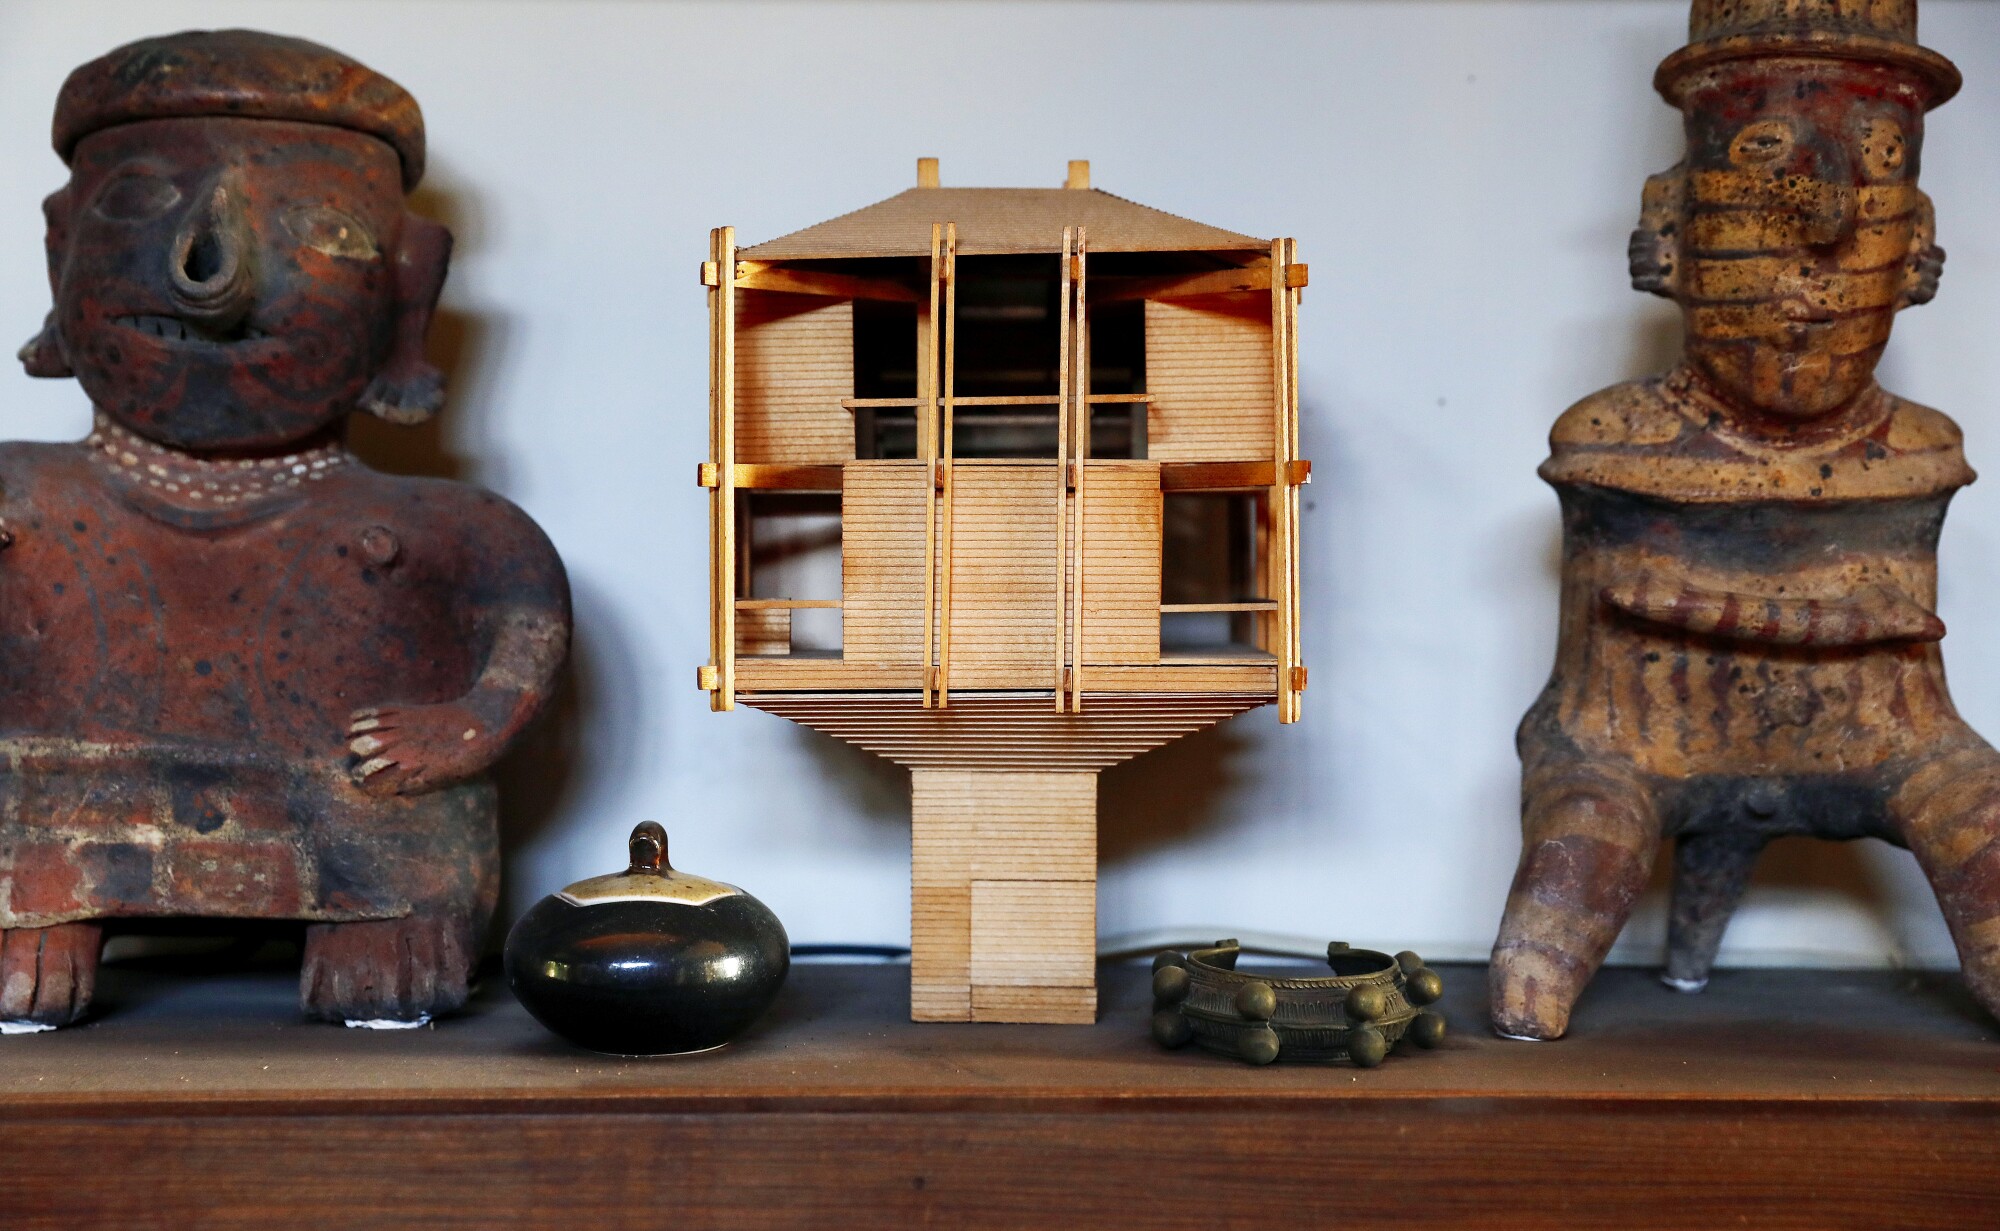 The wooden model of Bernard Judge's Tree House sits on a shelf between pre-Columbian-style figurines